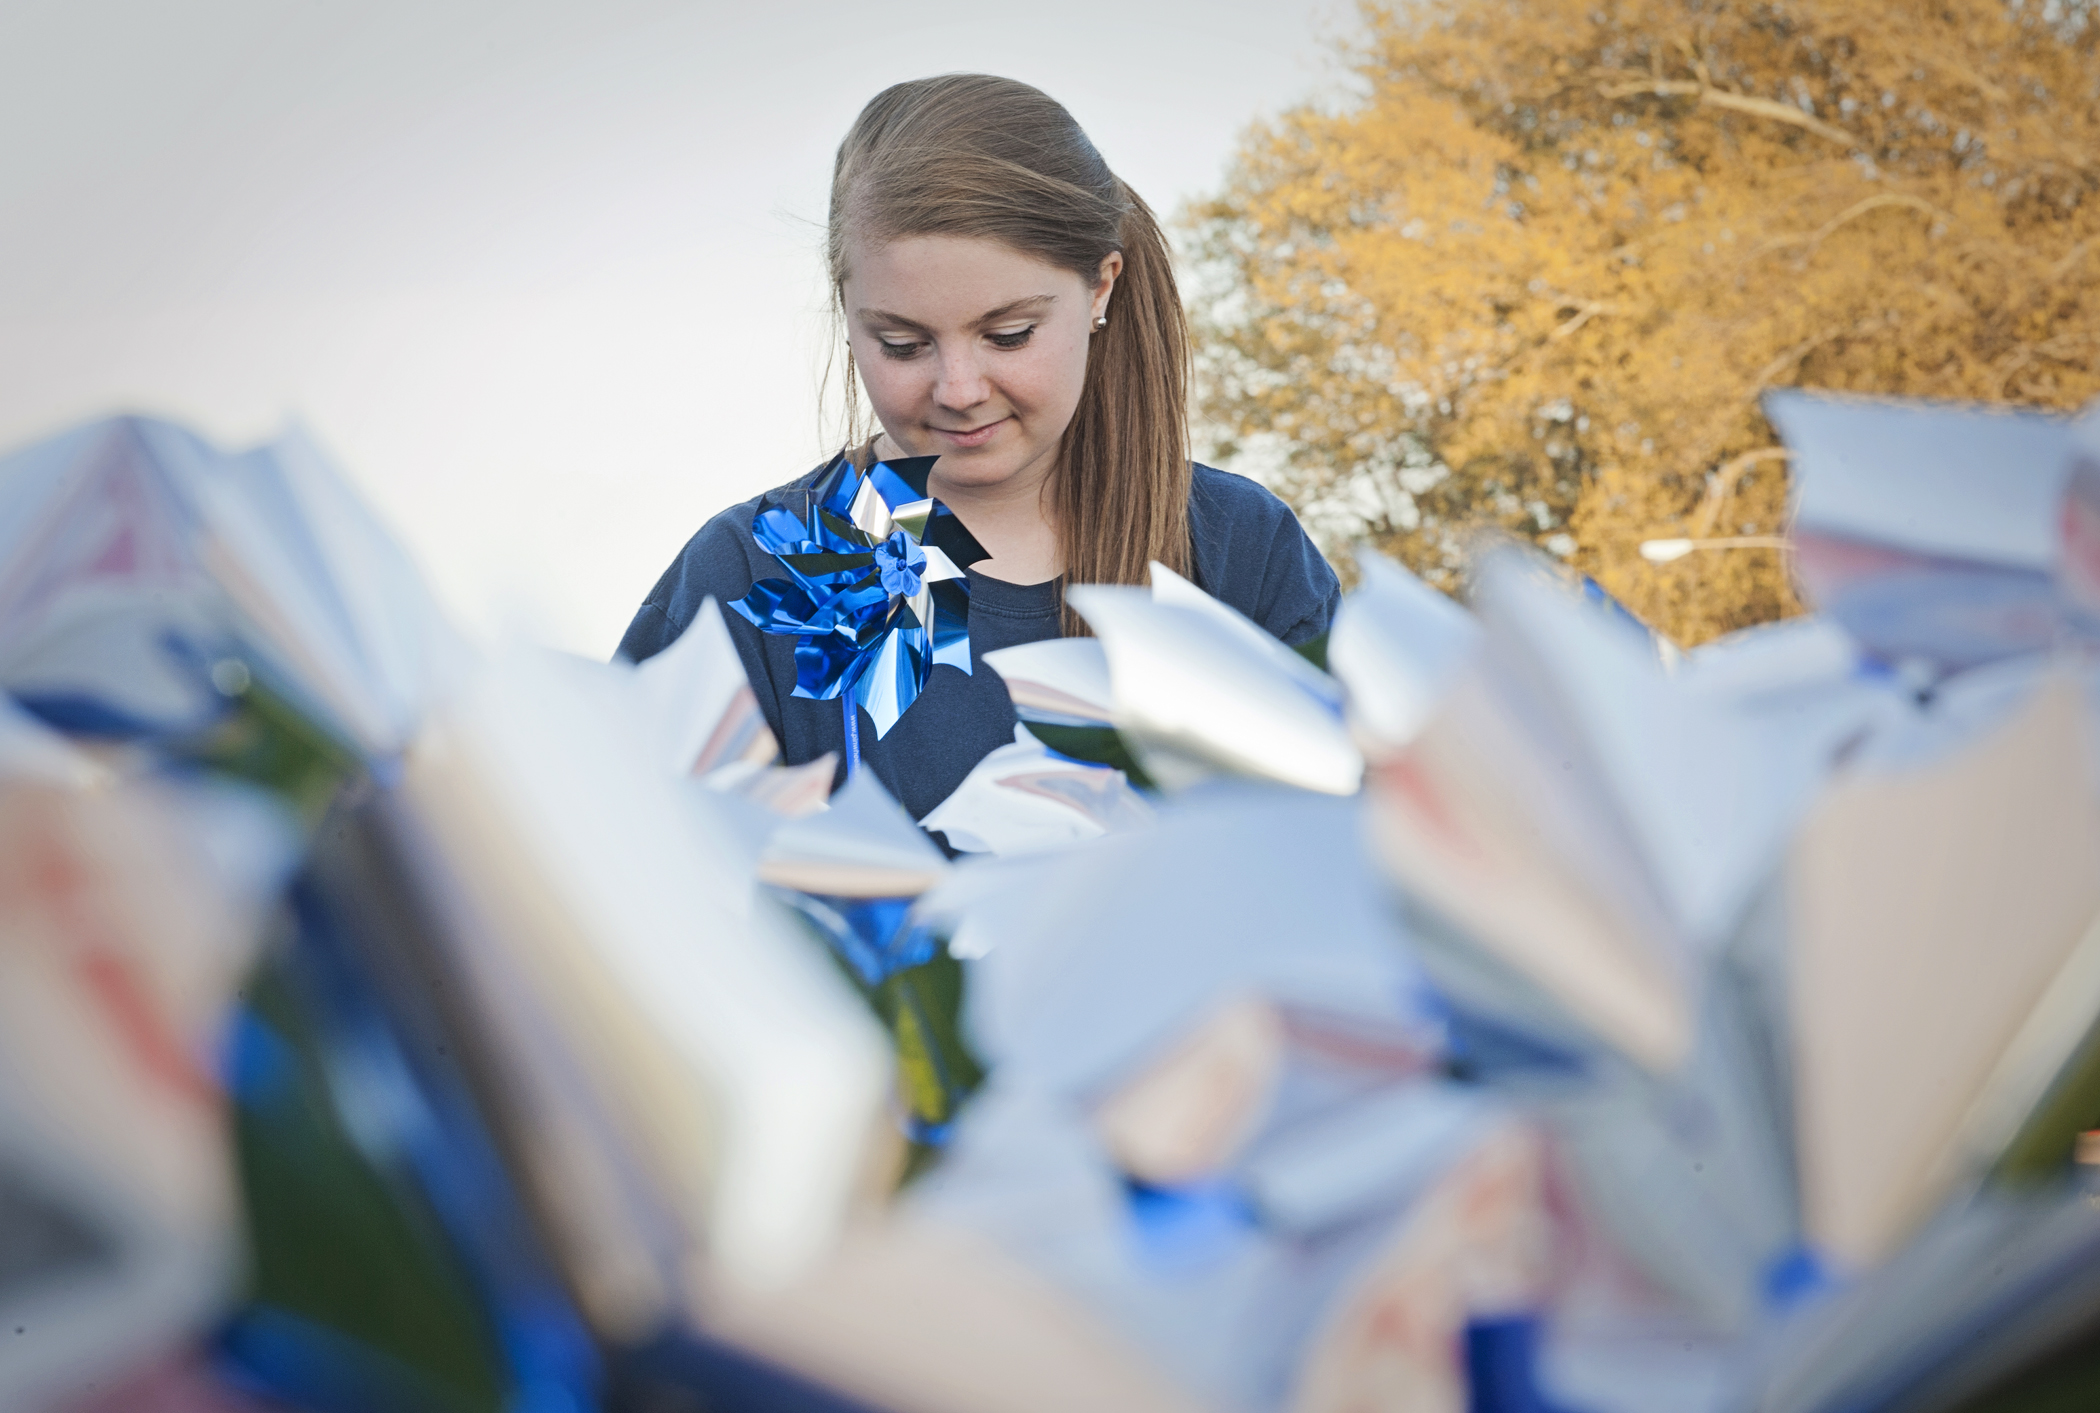   Corissa Lambert, of Alpine, Ala., a Kappa Delta sorority member from Millsaps College, plants pinwheels at UMMC on April 1 in recognition of Child Abuse Prevention Month.